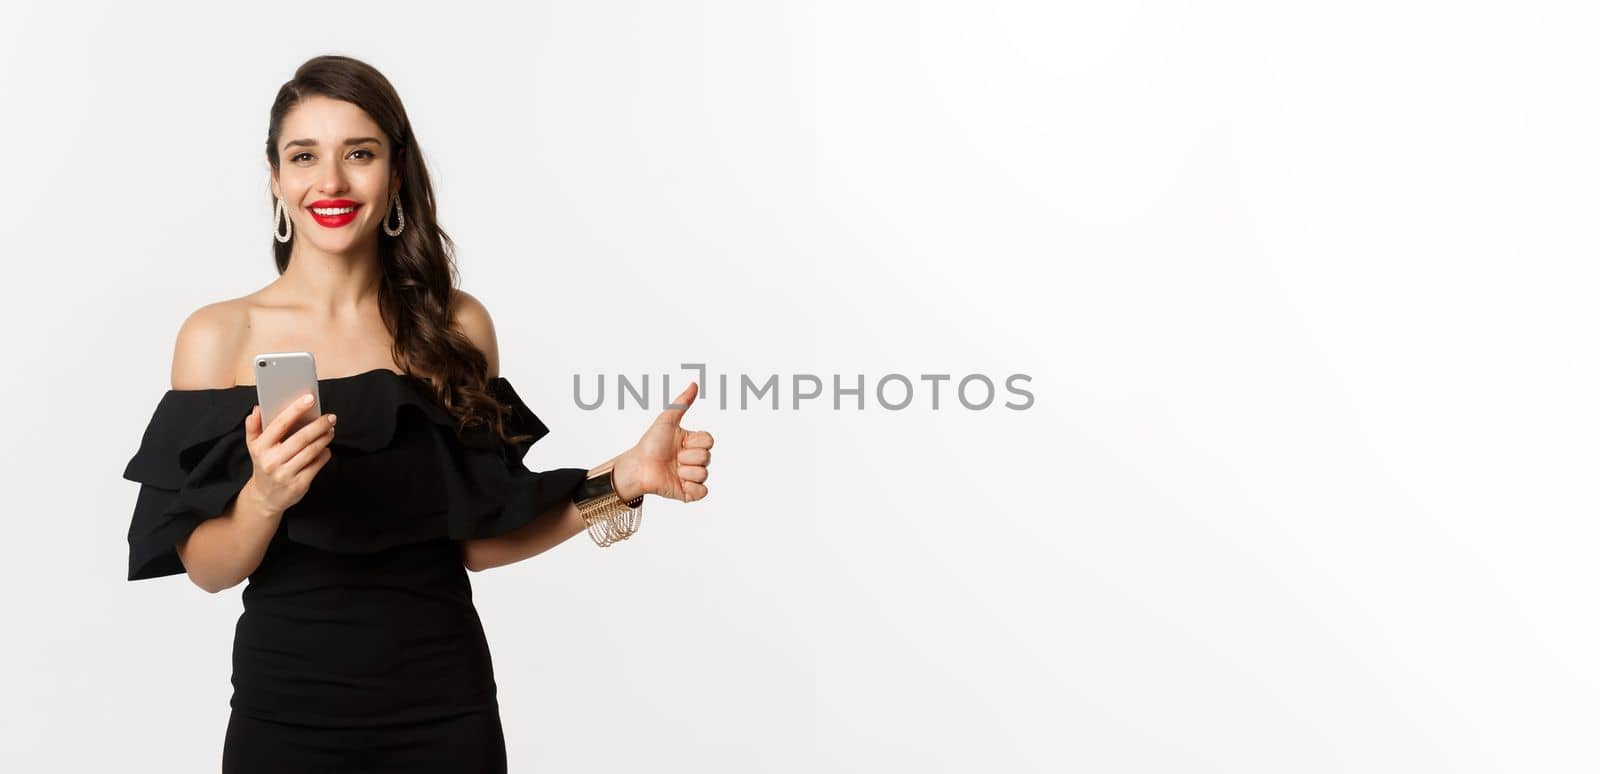 Online shopping concept. Attractive woman in trendy black dress, makeup, showing thumb-up and using mobile phone app, white background.